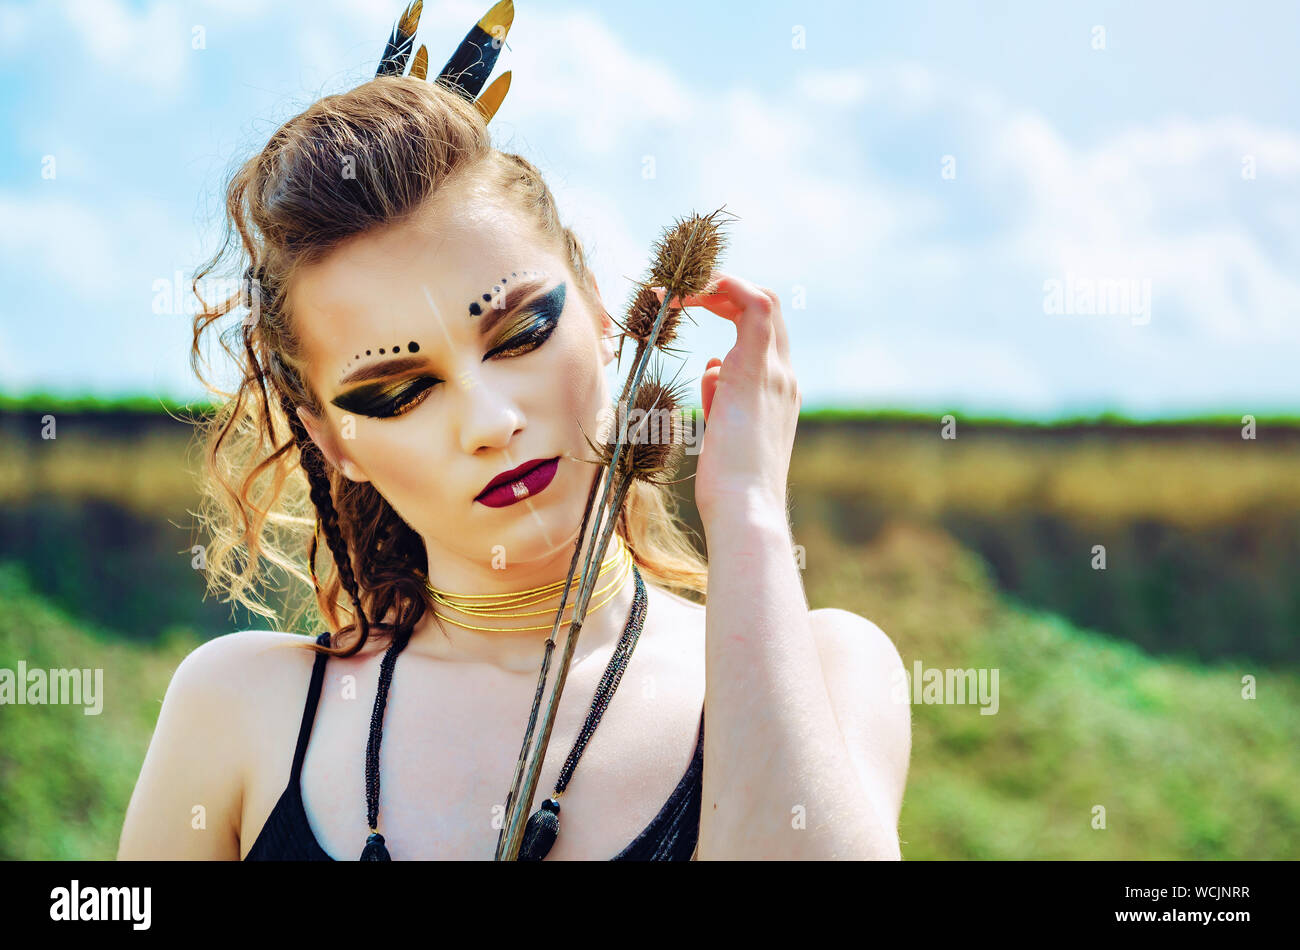 Portrait of a girl with aggressive makeup amazon viking presses prickly  flowers thistle to her face Stock Photo - Alamy